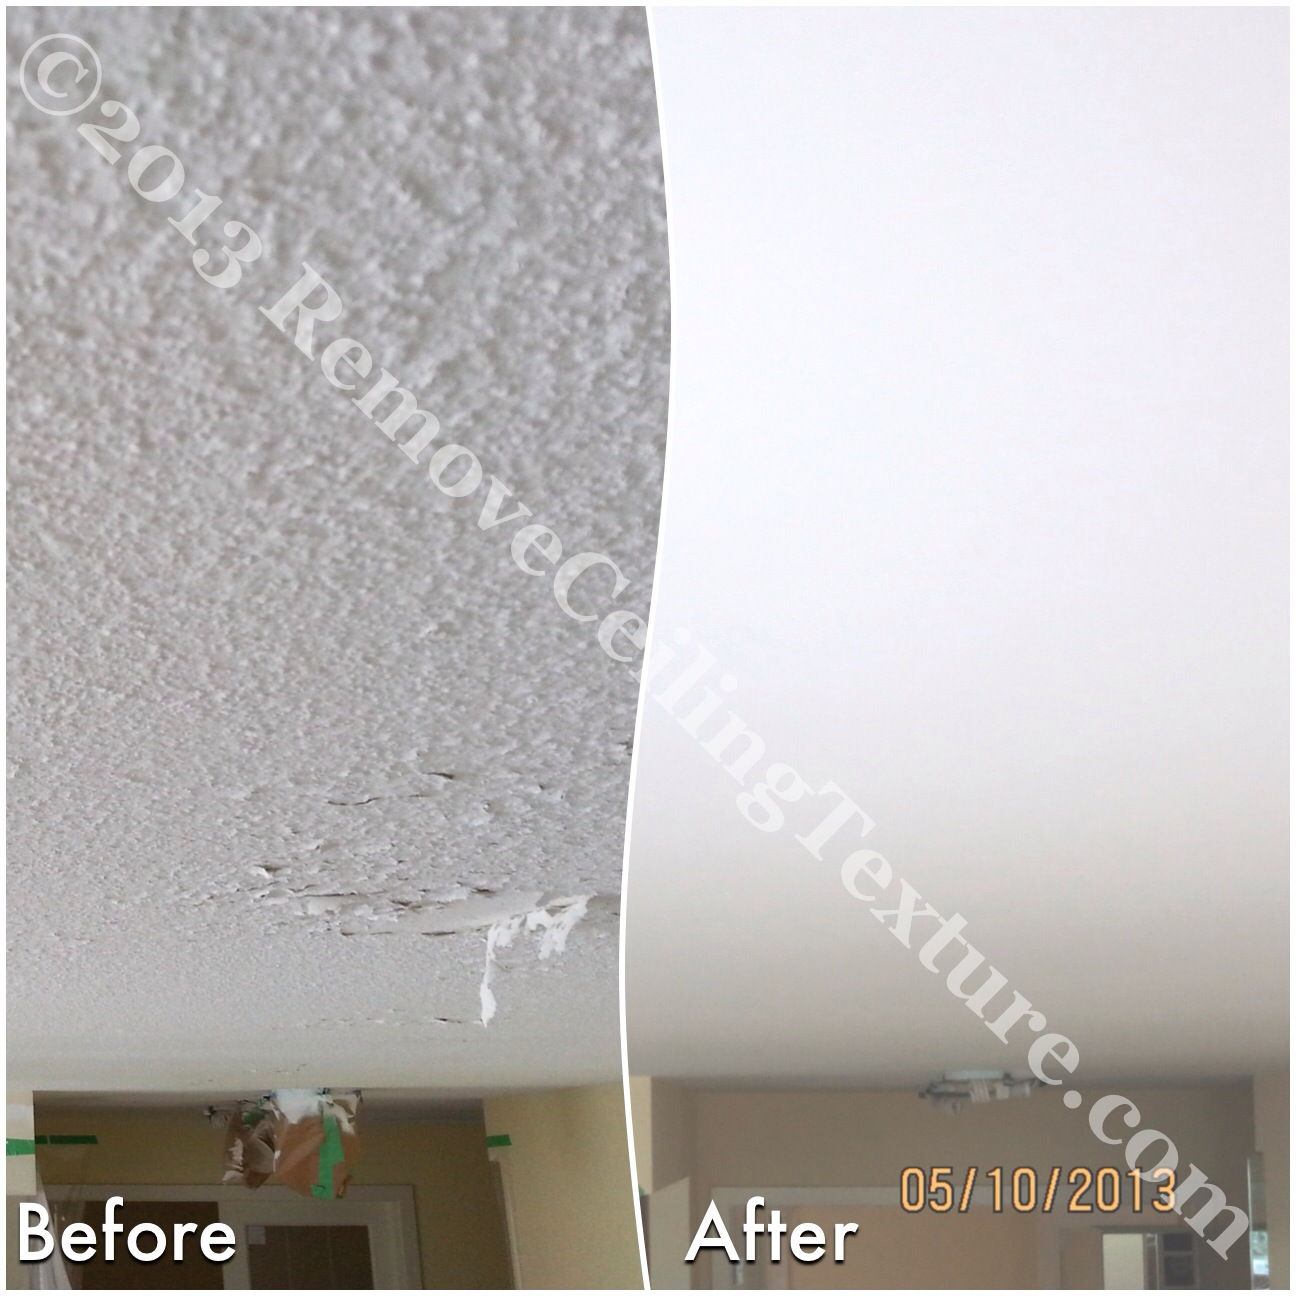 Peeling, water damaged ceilings at the entrance